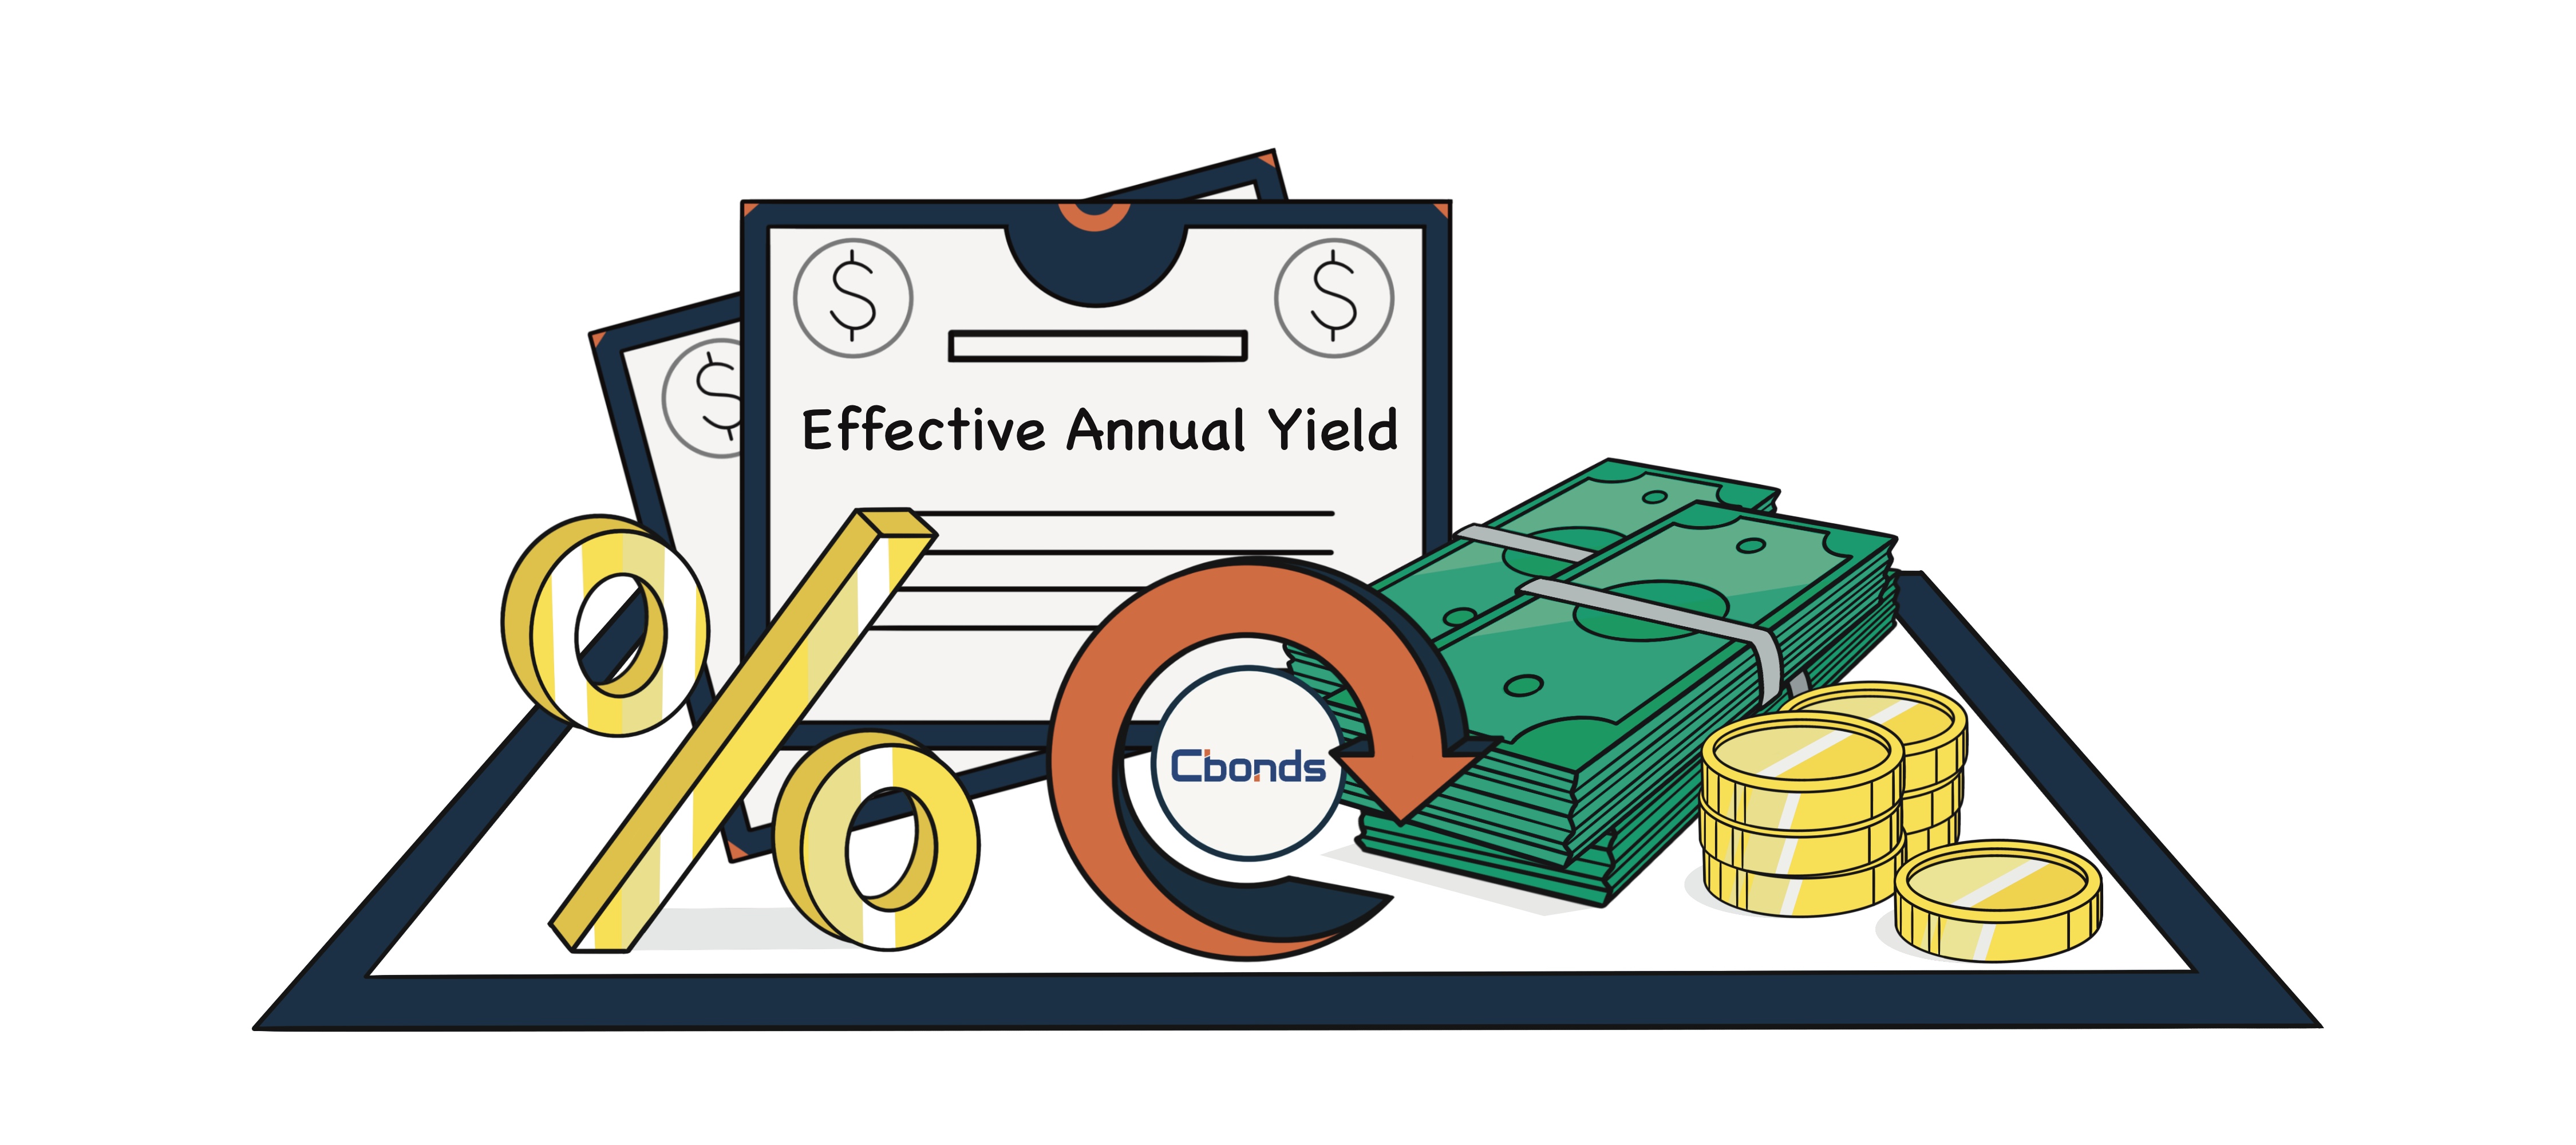 Effective Annual Yield